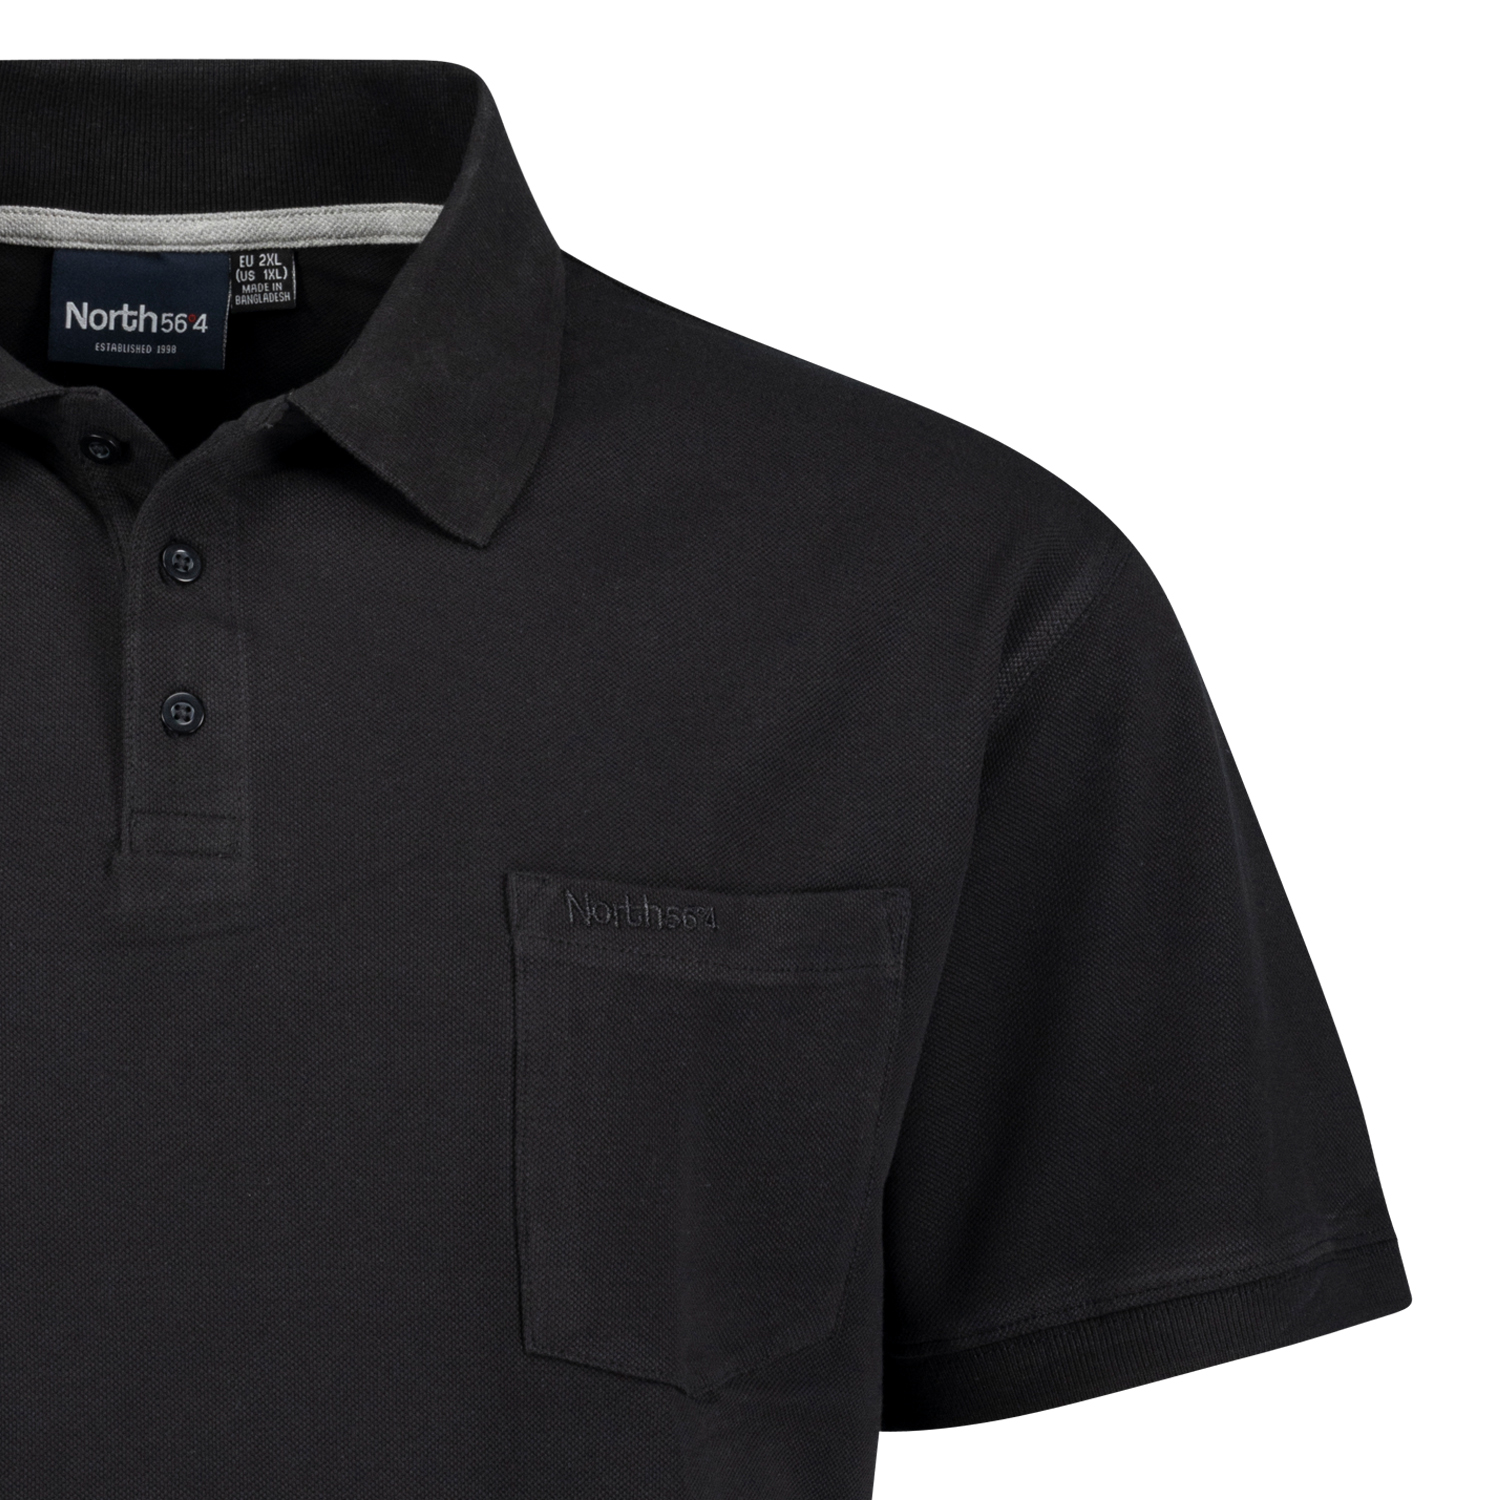 Poloshirt in black by Greyes/North 56°4 in oversizes until 8XL